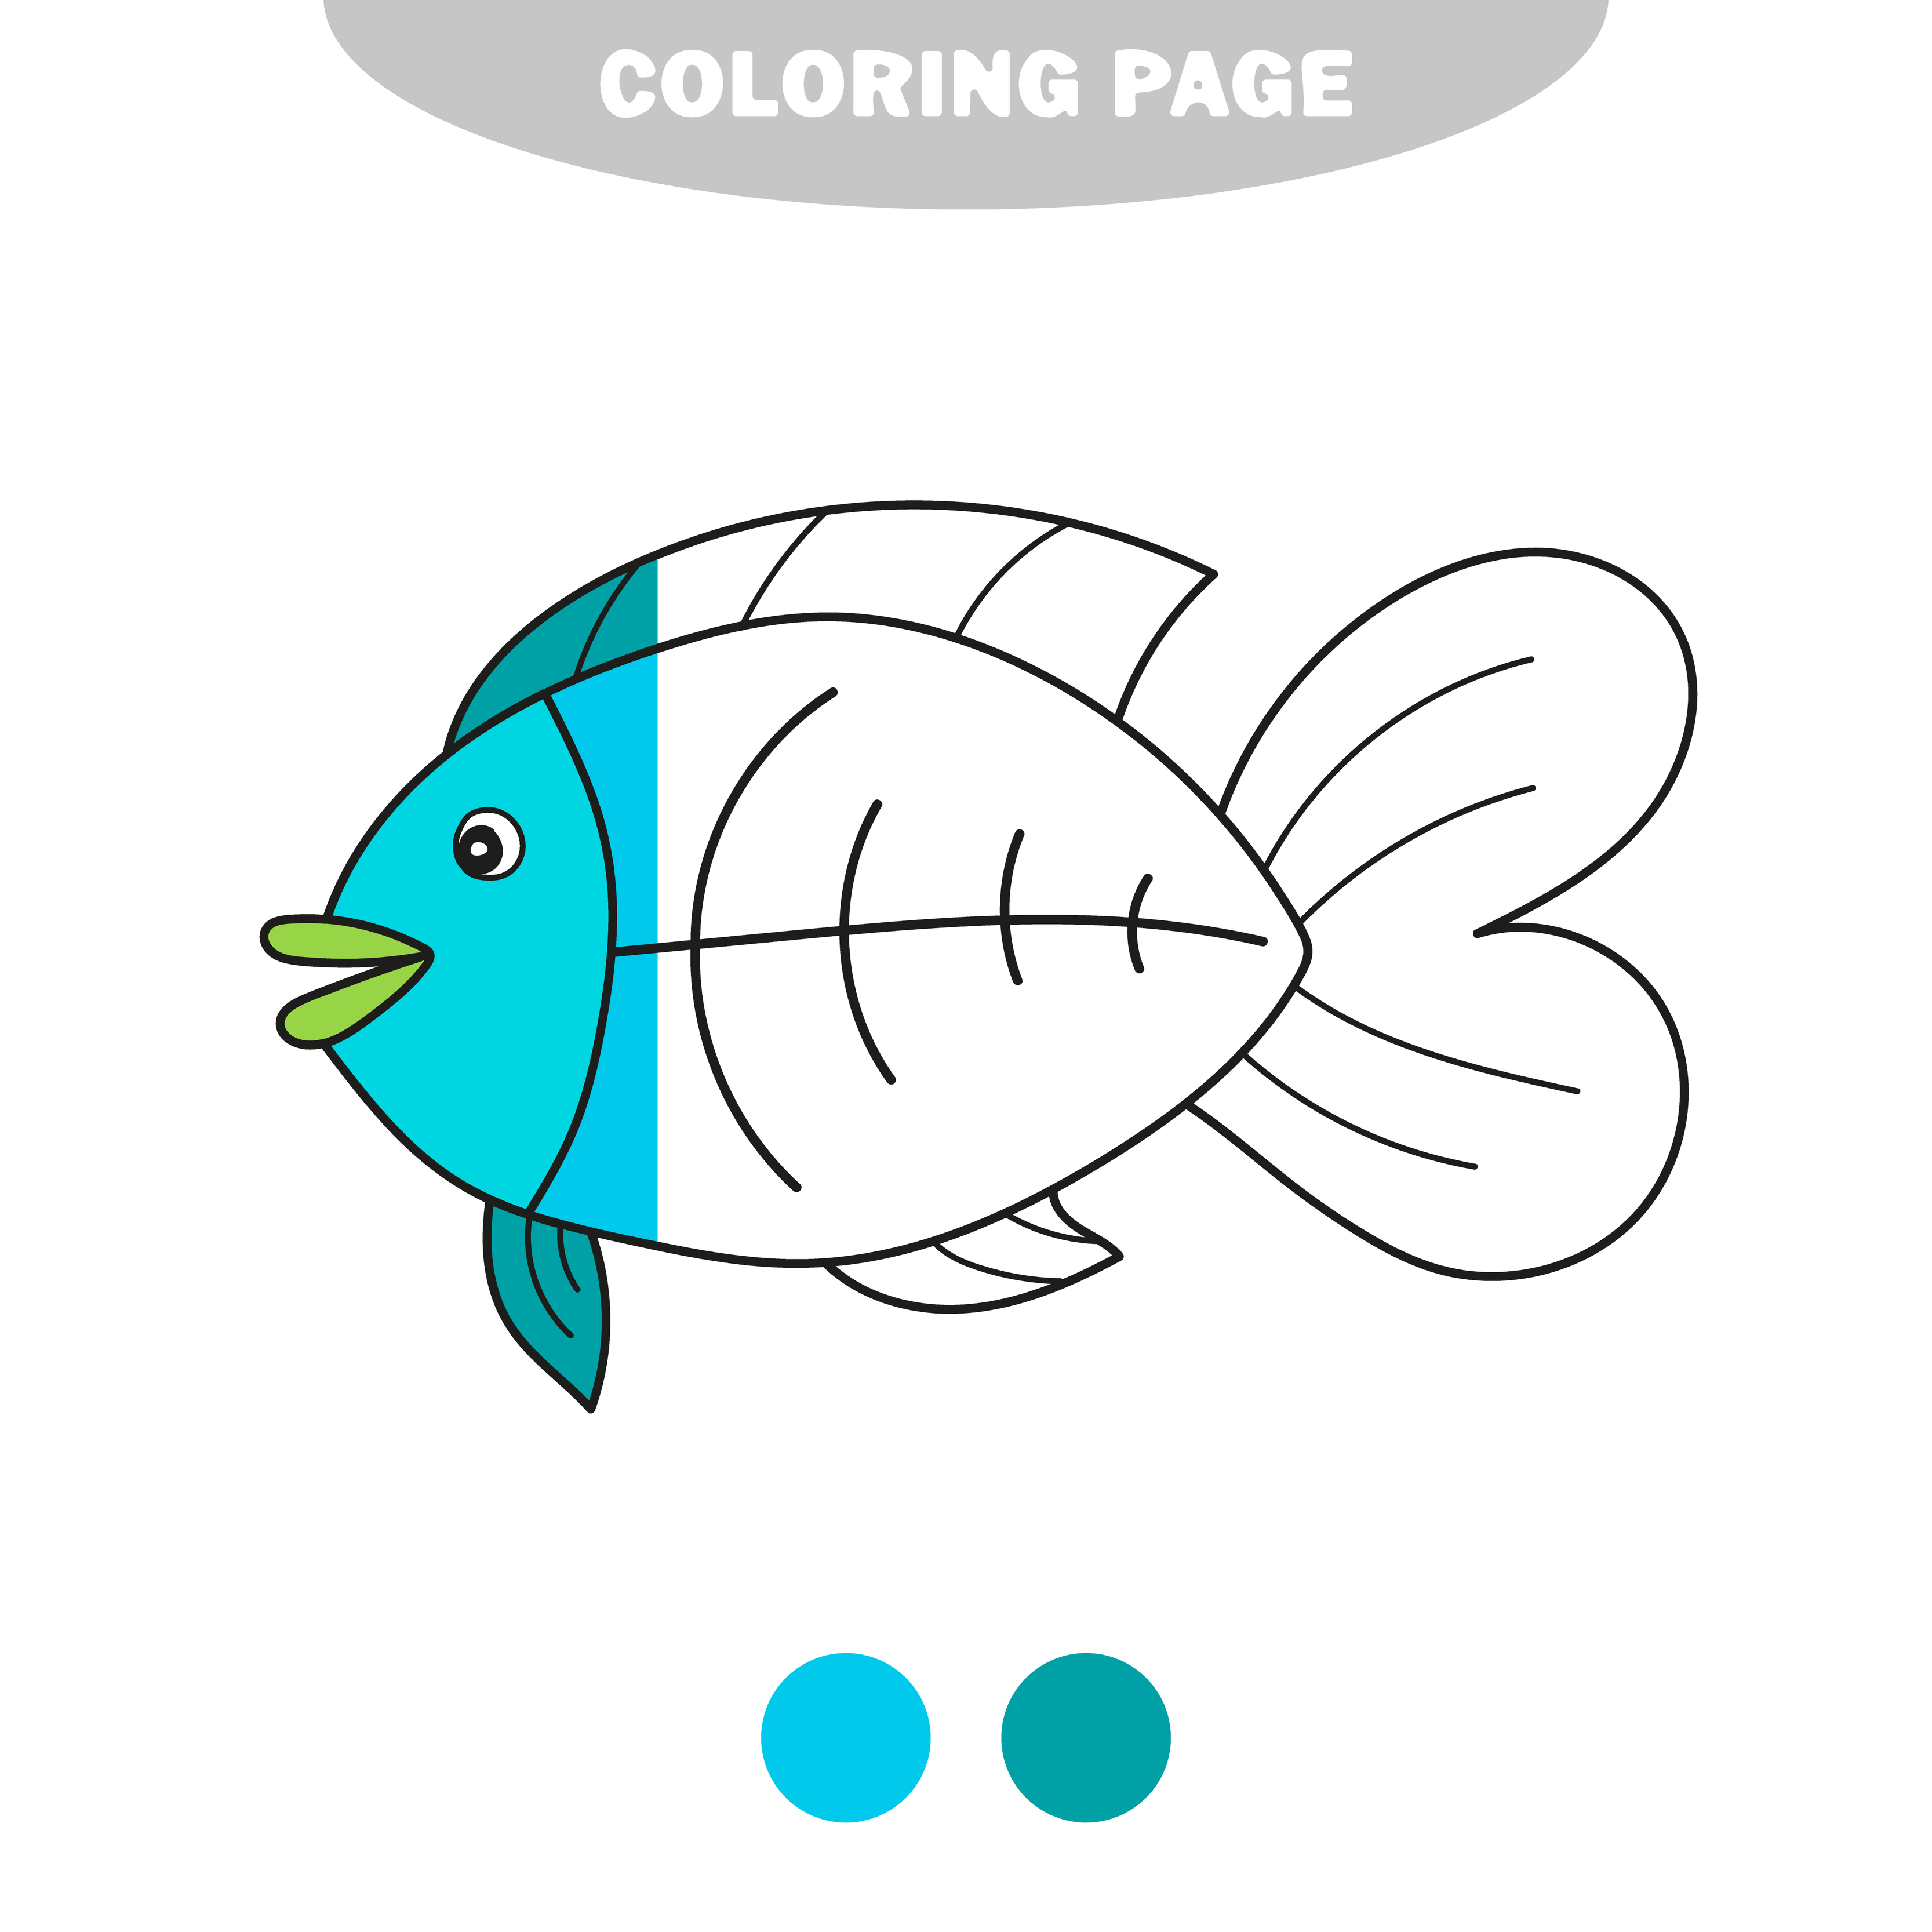 How To Draw Fish For Kids, Step by Step, Drawing Guide, by Dawn - DragoArt-saigonsouth.com.vn